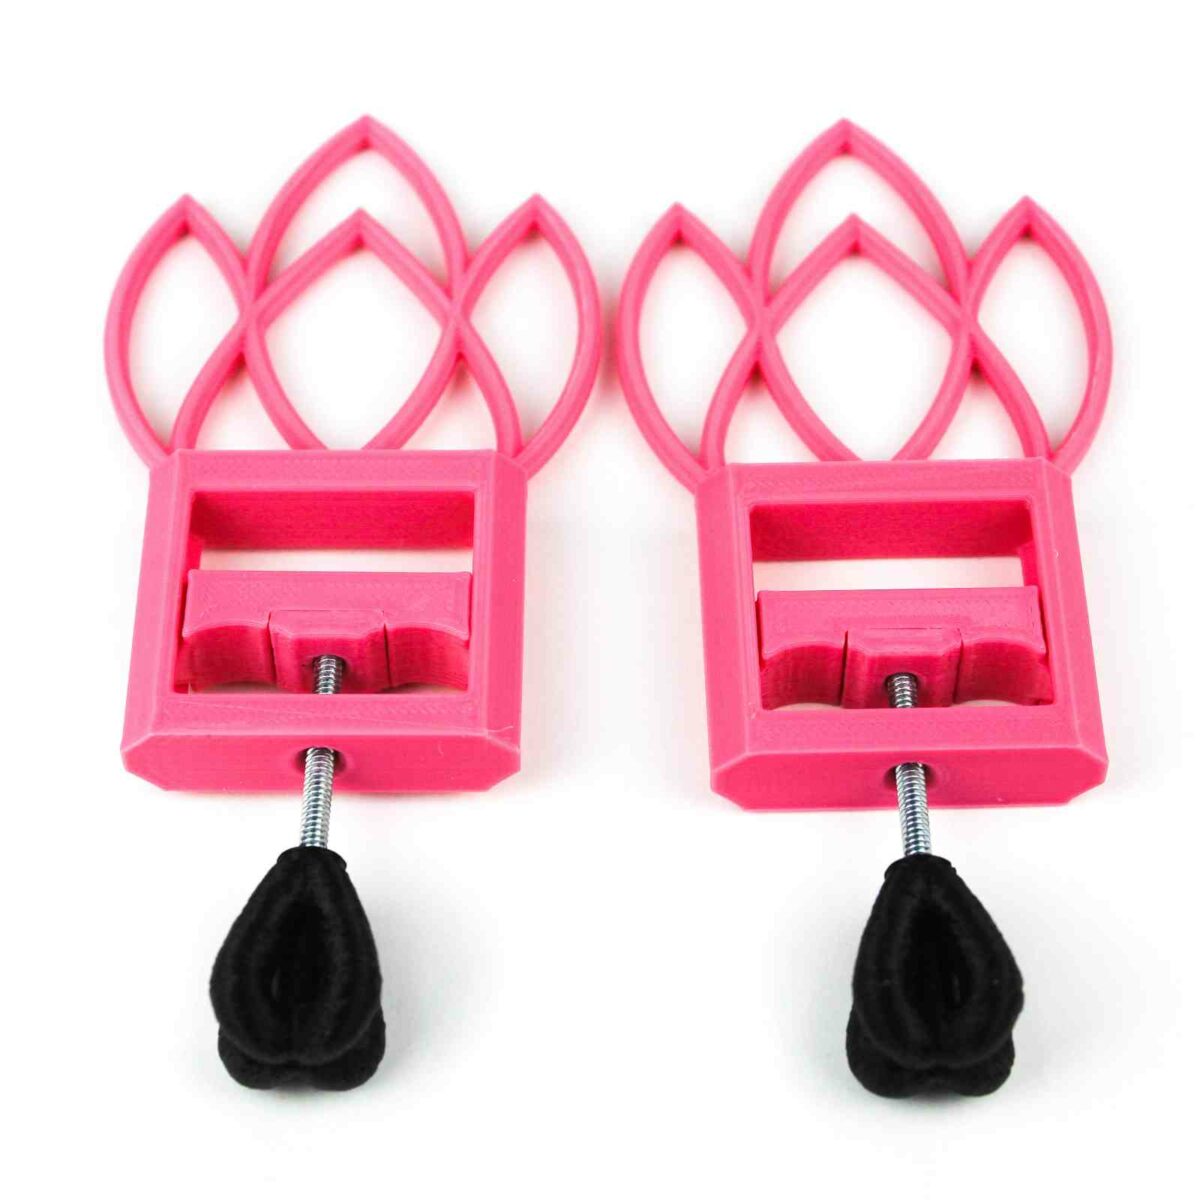 The Bad Princess Nipple Clamps, cute ddlg and sissy toys you'll love to hate